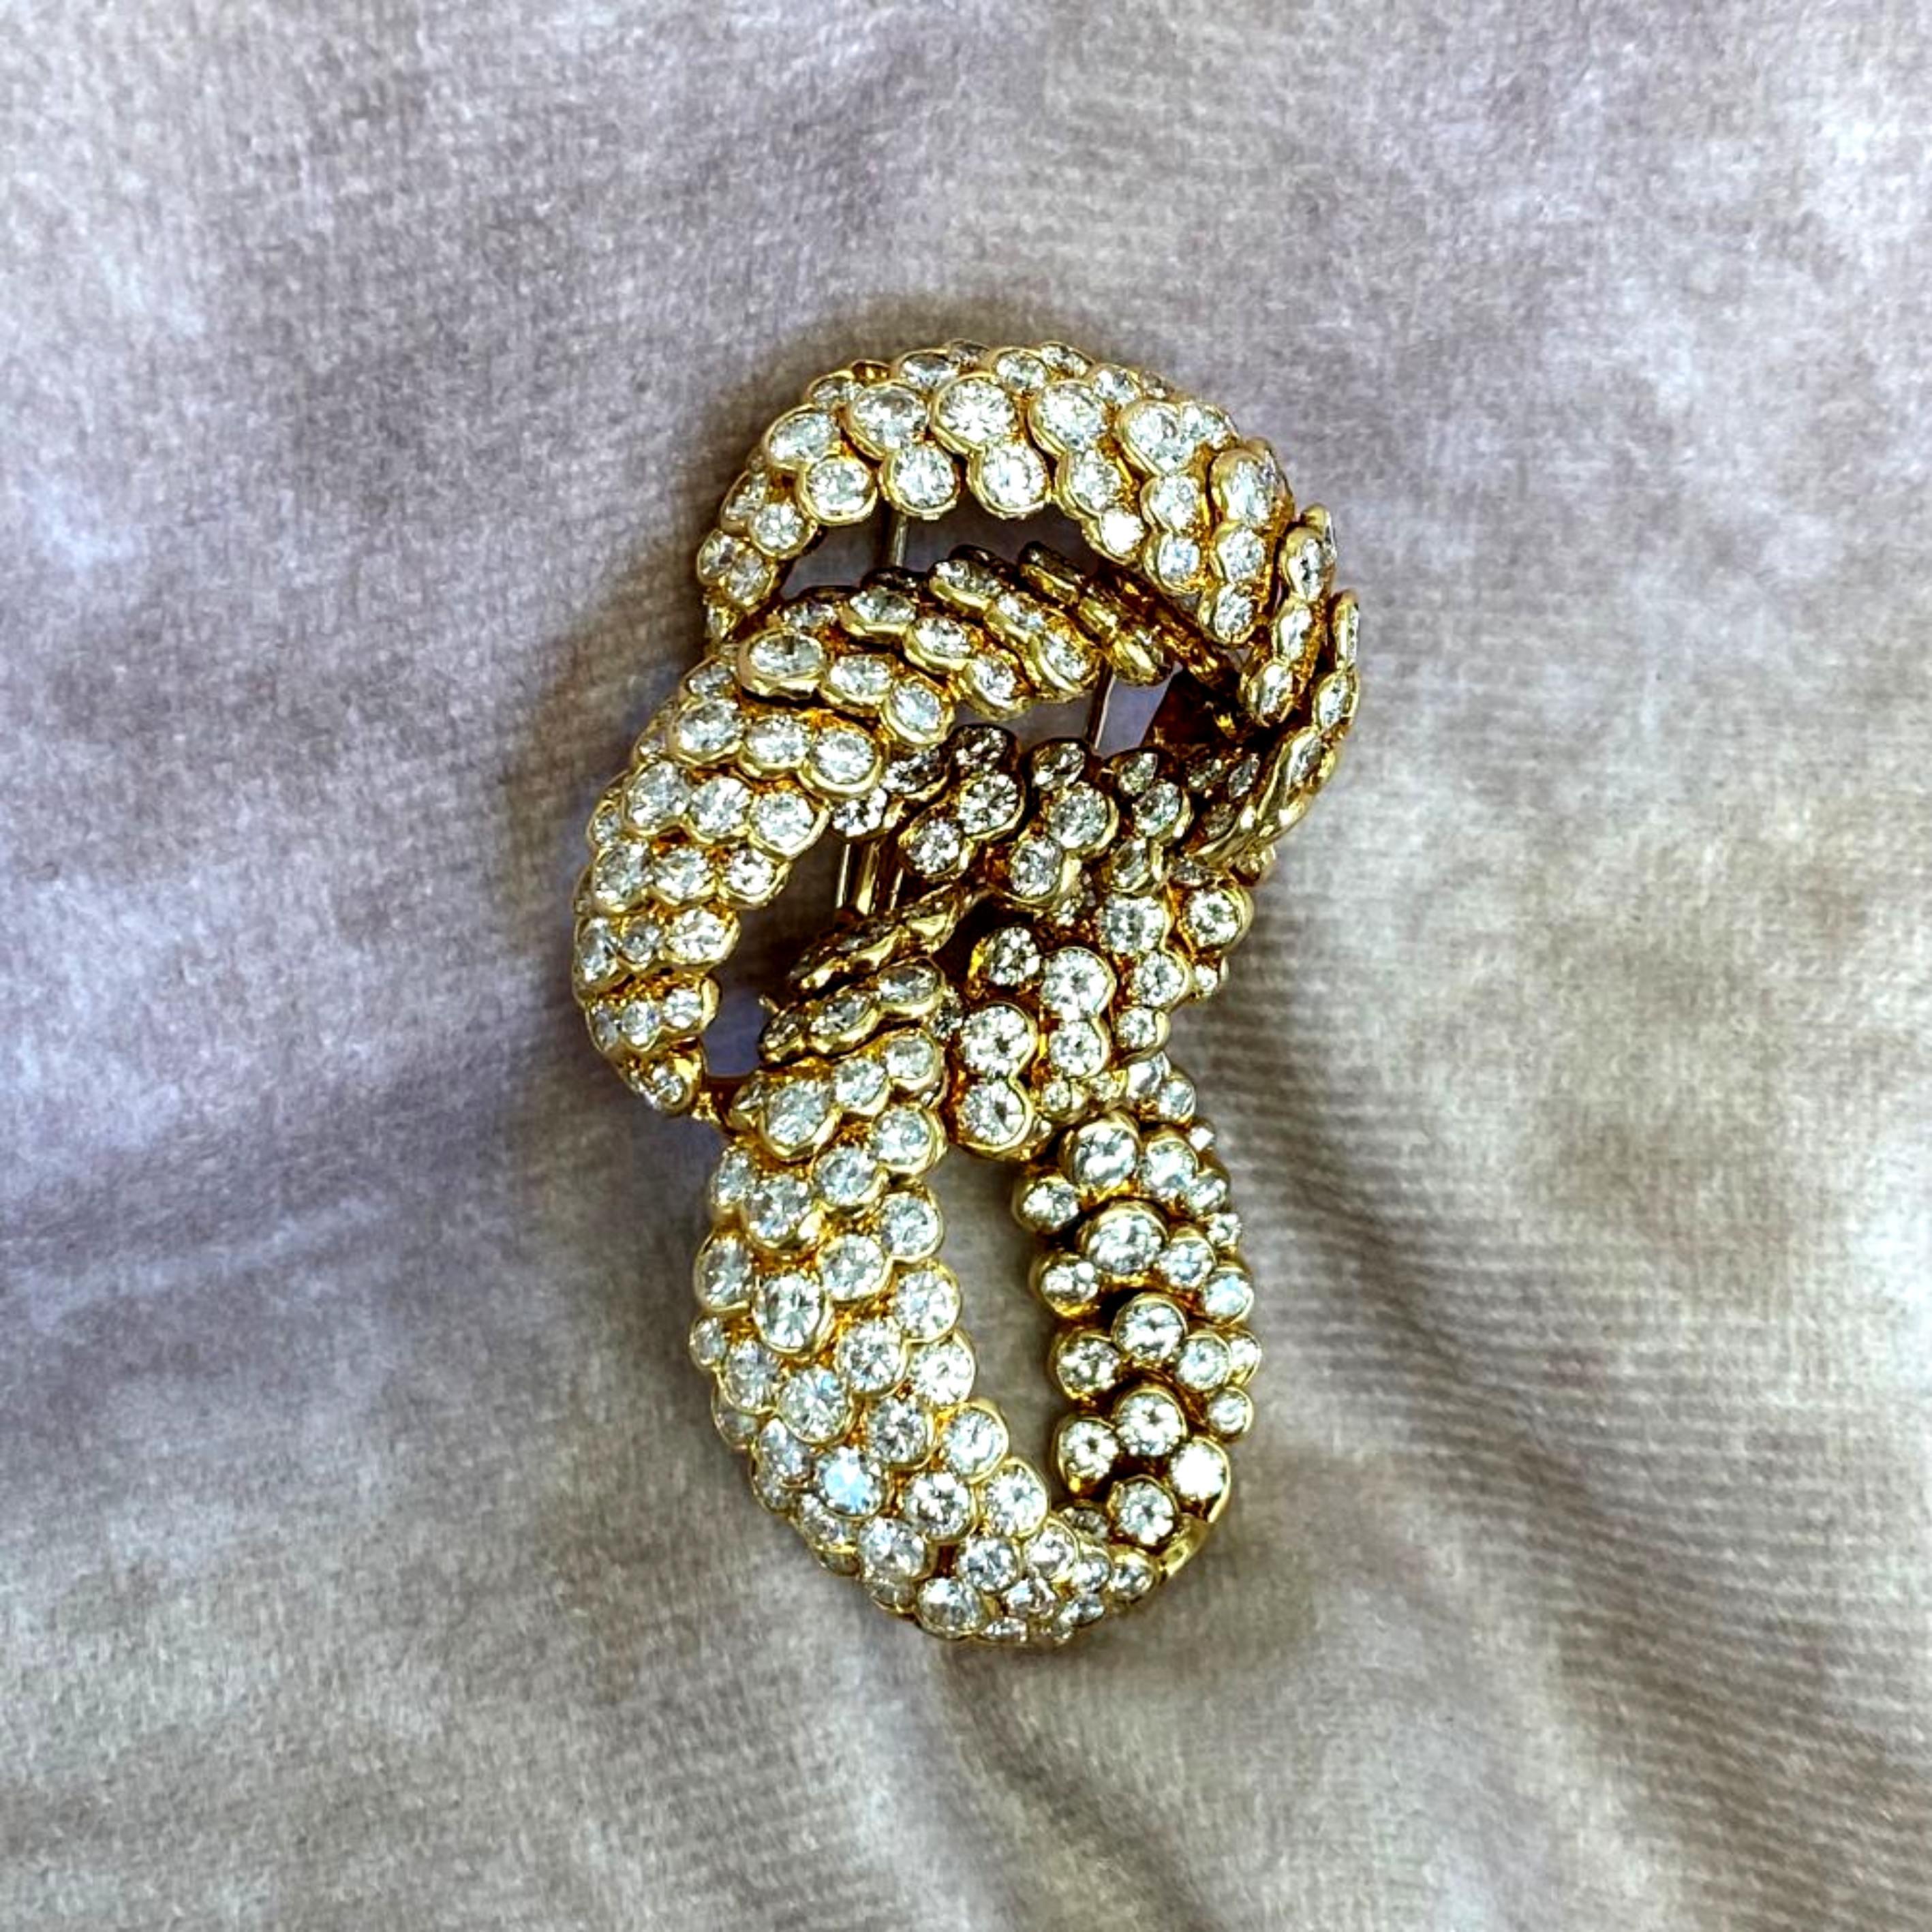 This is a beautiful vintage Van Cleef and Arpels brooch crafted in France circa 1960. It features three interlocking bands of 18k yellow gold adorned with graduated rows of collection-grade diamonds (11.20 carats total weight), set in half-bezels.